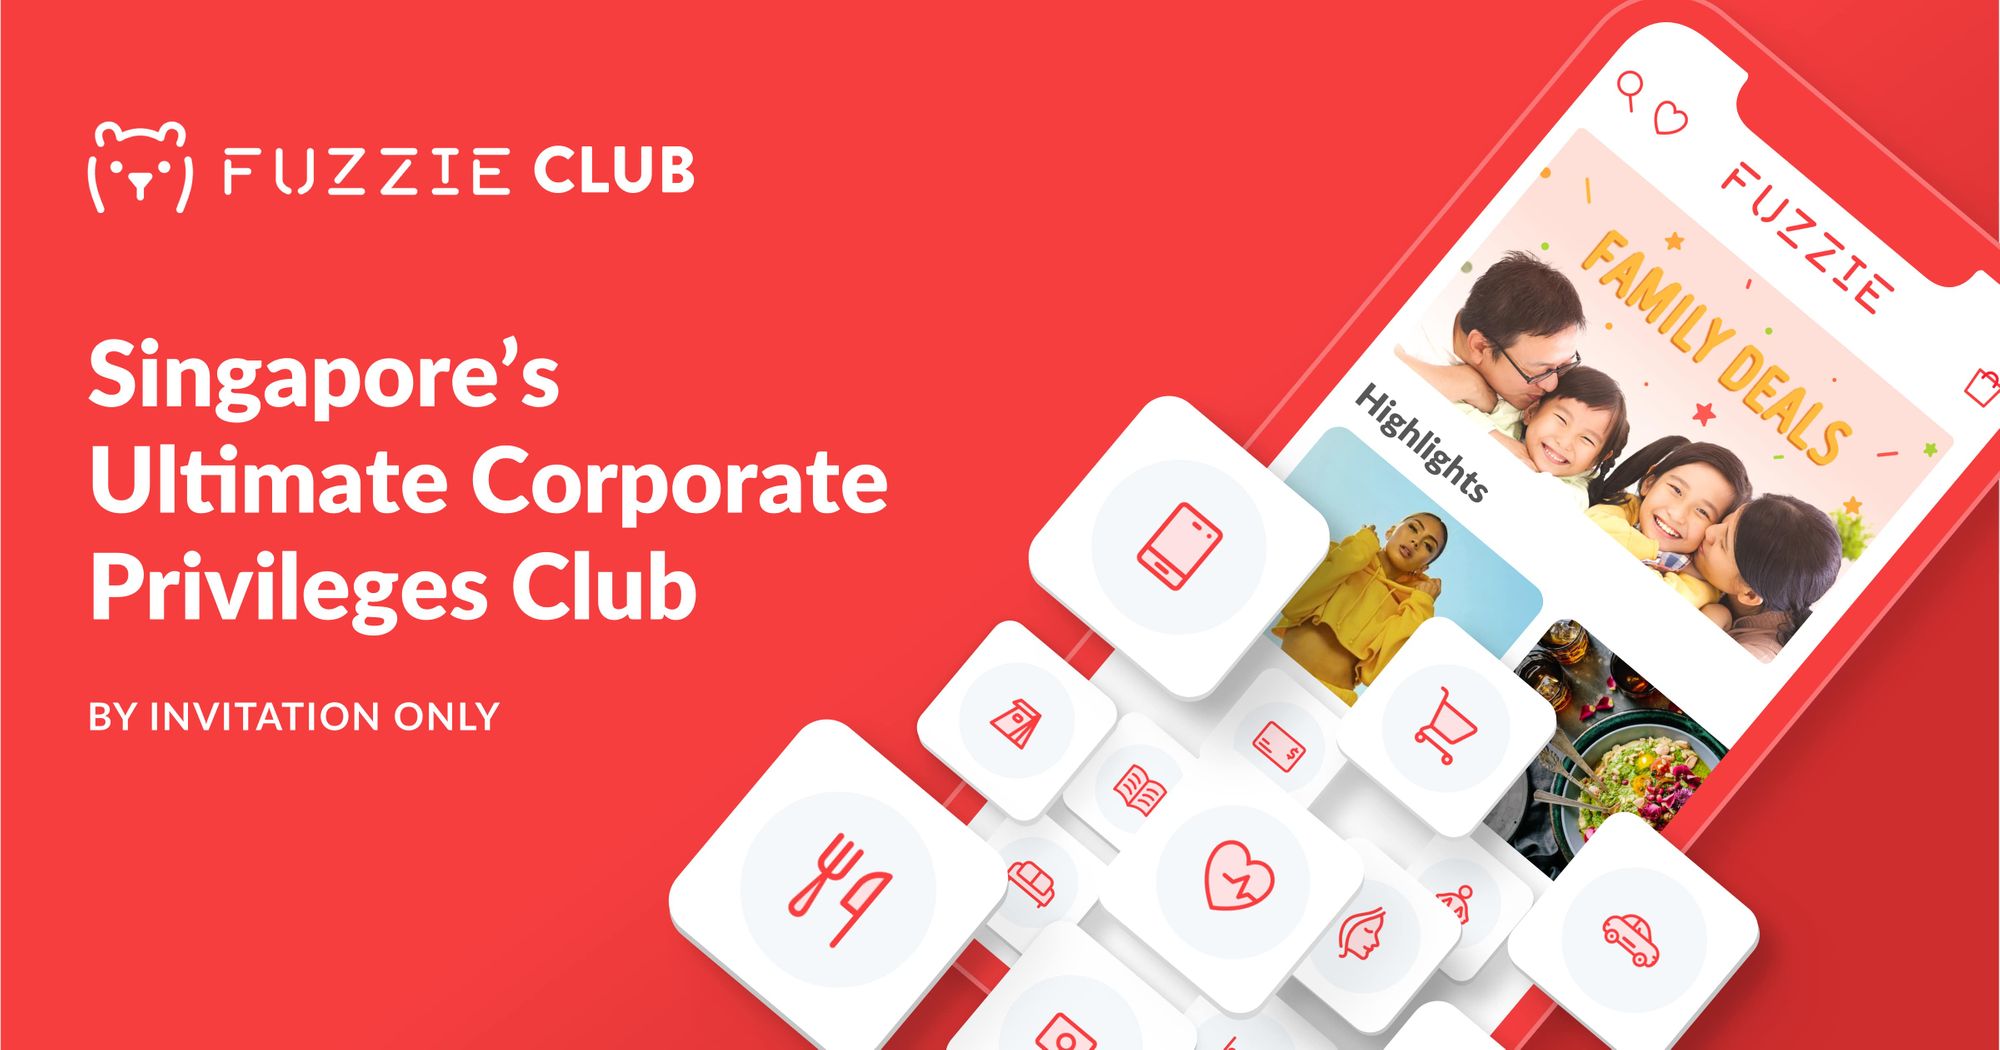 How to get Fuzzie Club membership with referral and promo code